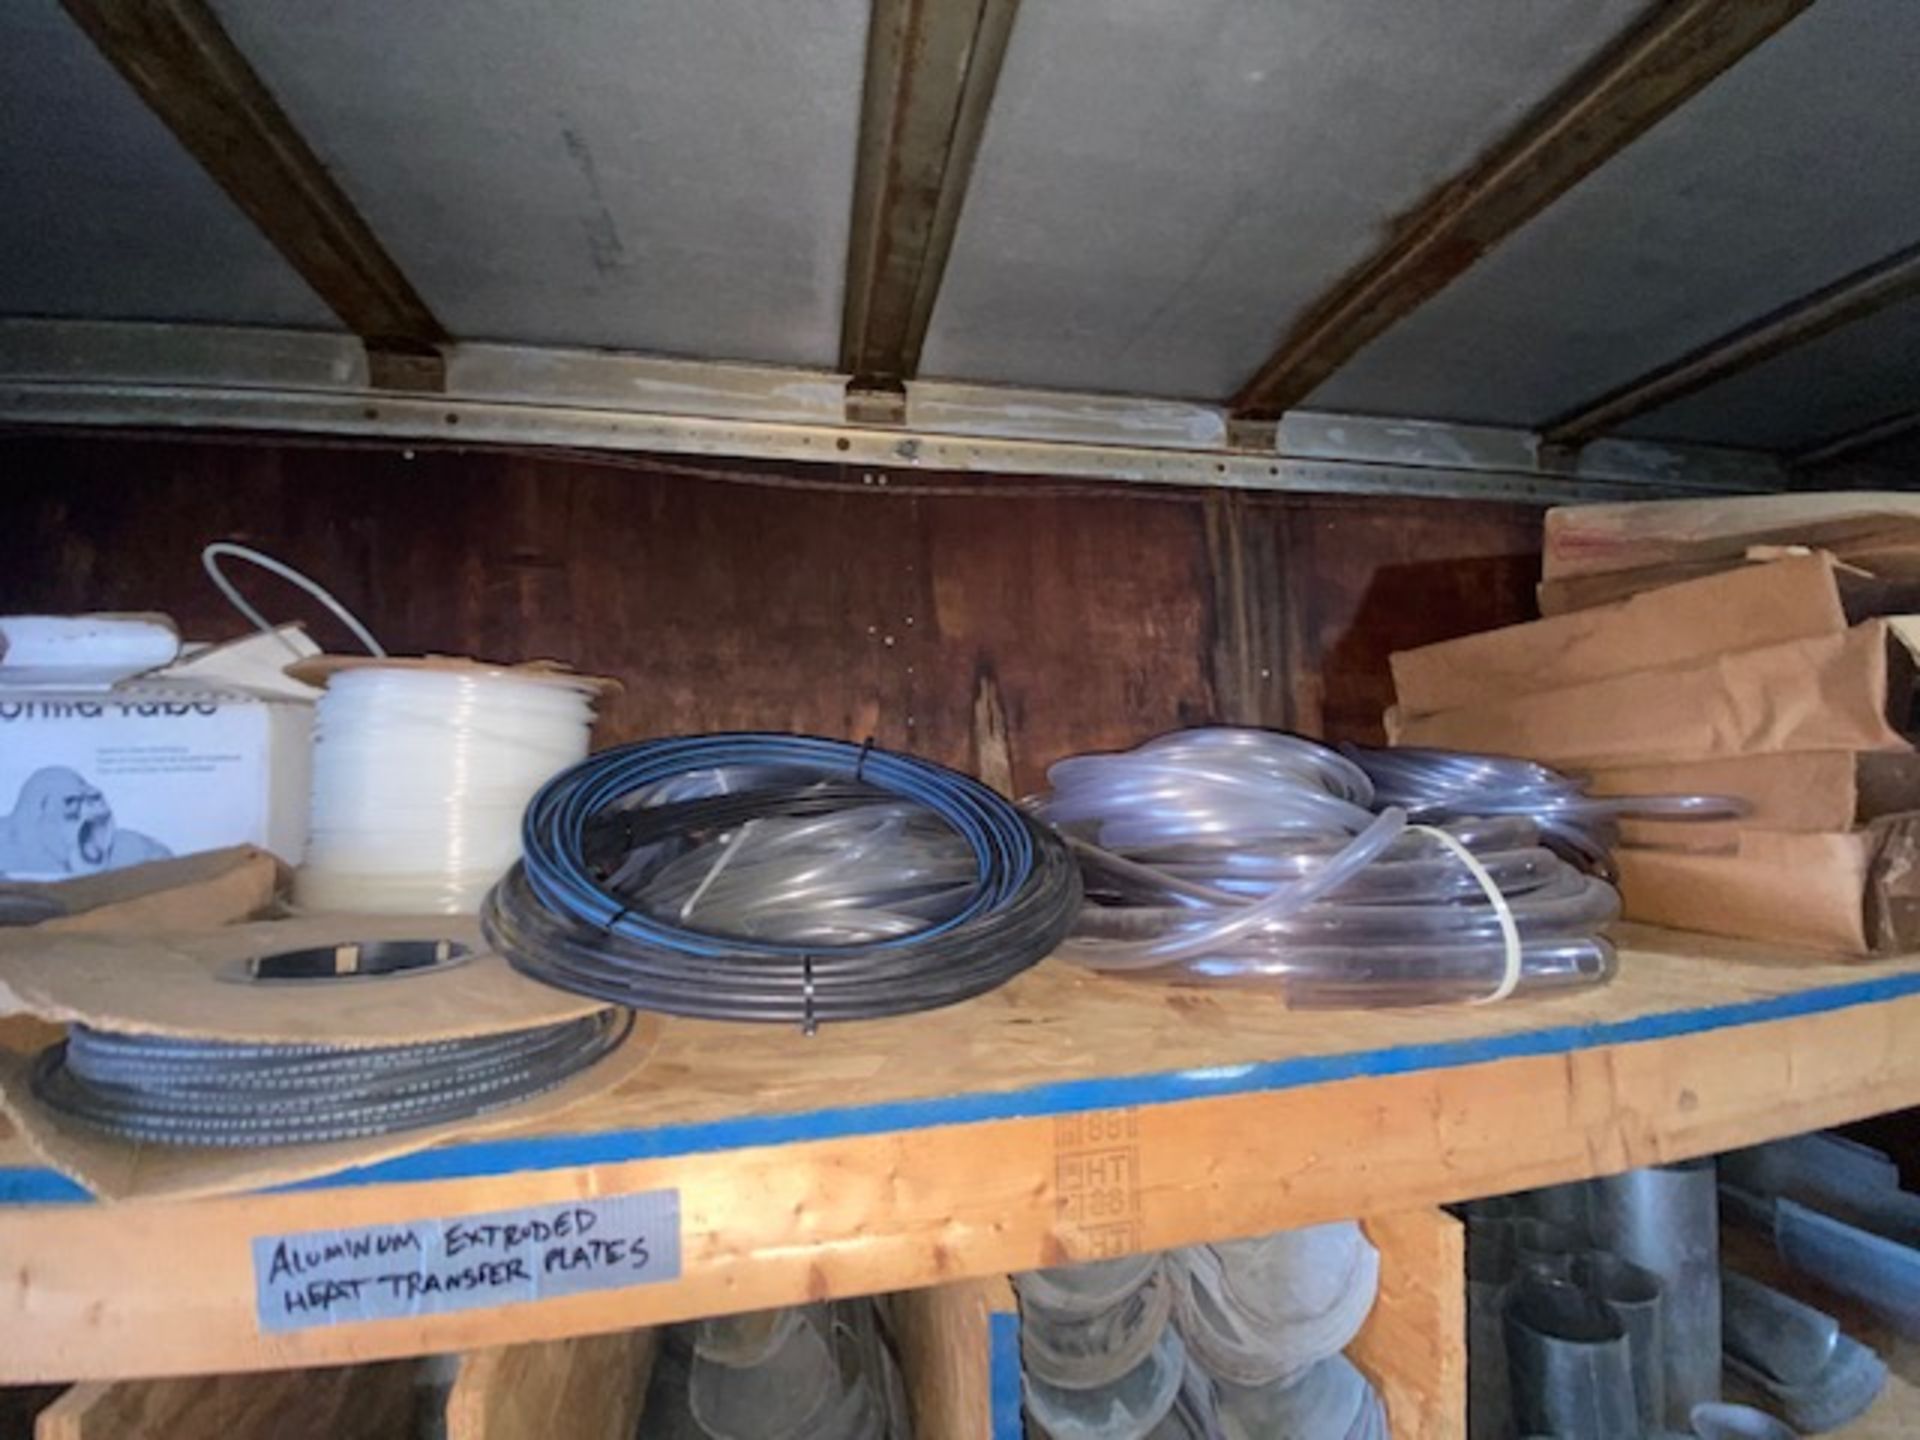 Contents of Top Shelf, Includes Assorted Rubber & Plastic Tubing (LOCATED IN MONROEVILLE, PA) - Image 2 of 4